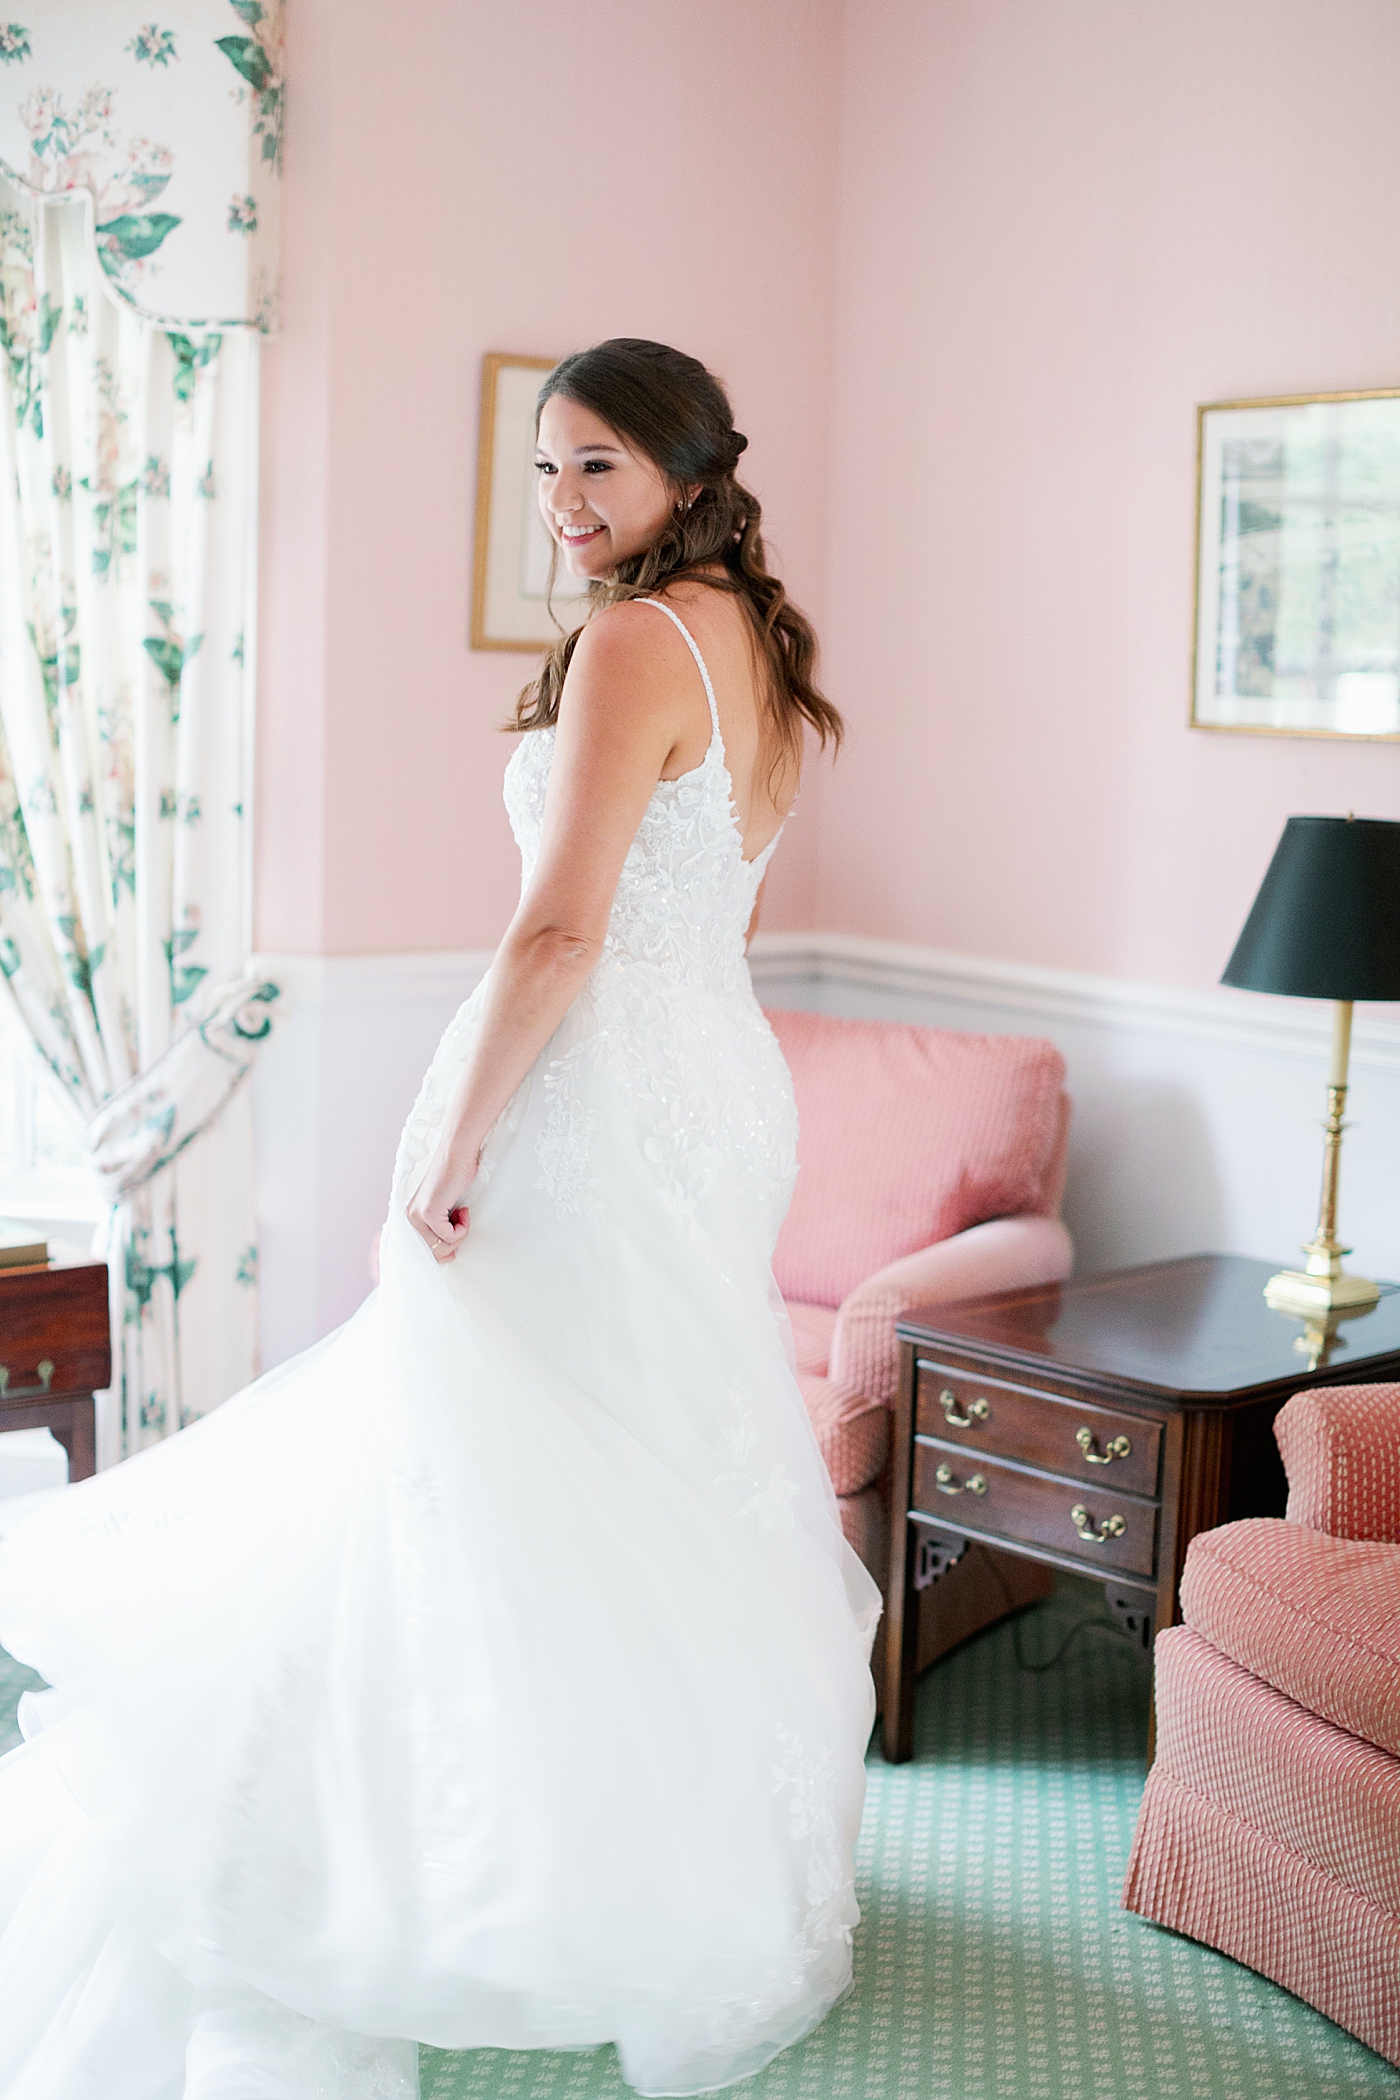 from their Steeplechase Museum wedding | Image by Annie Laura Photo